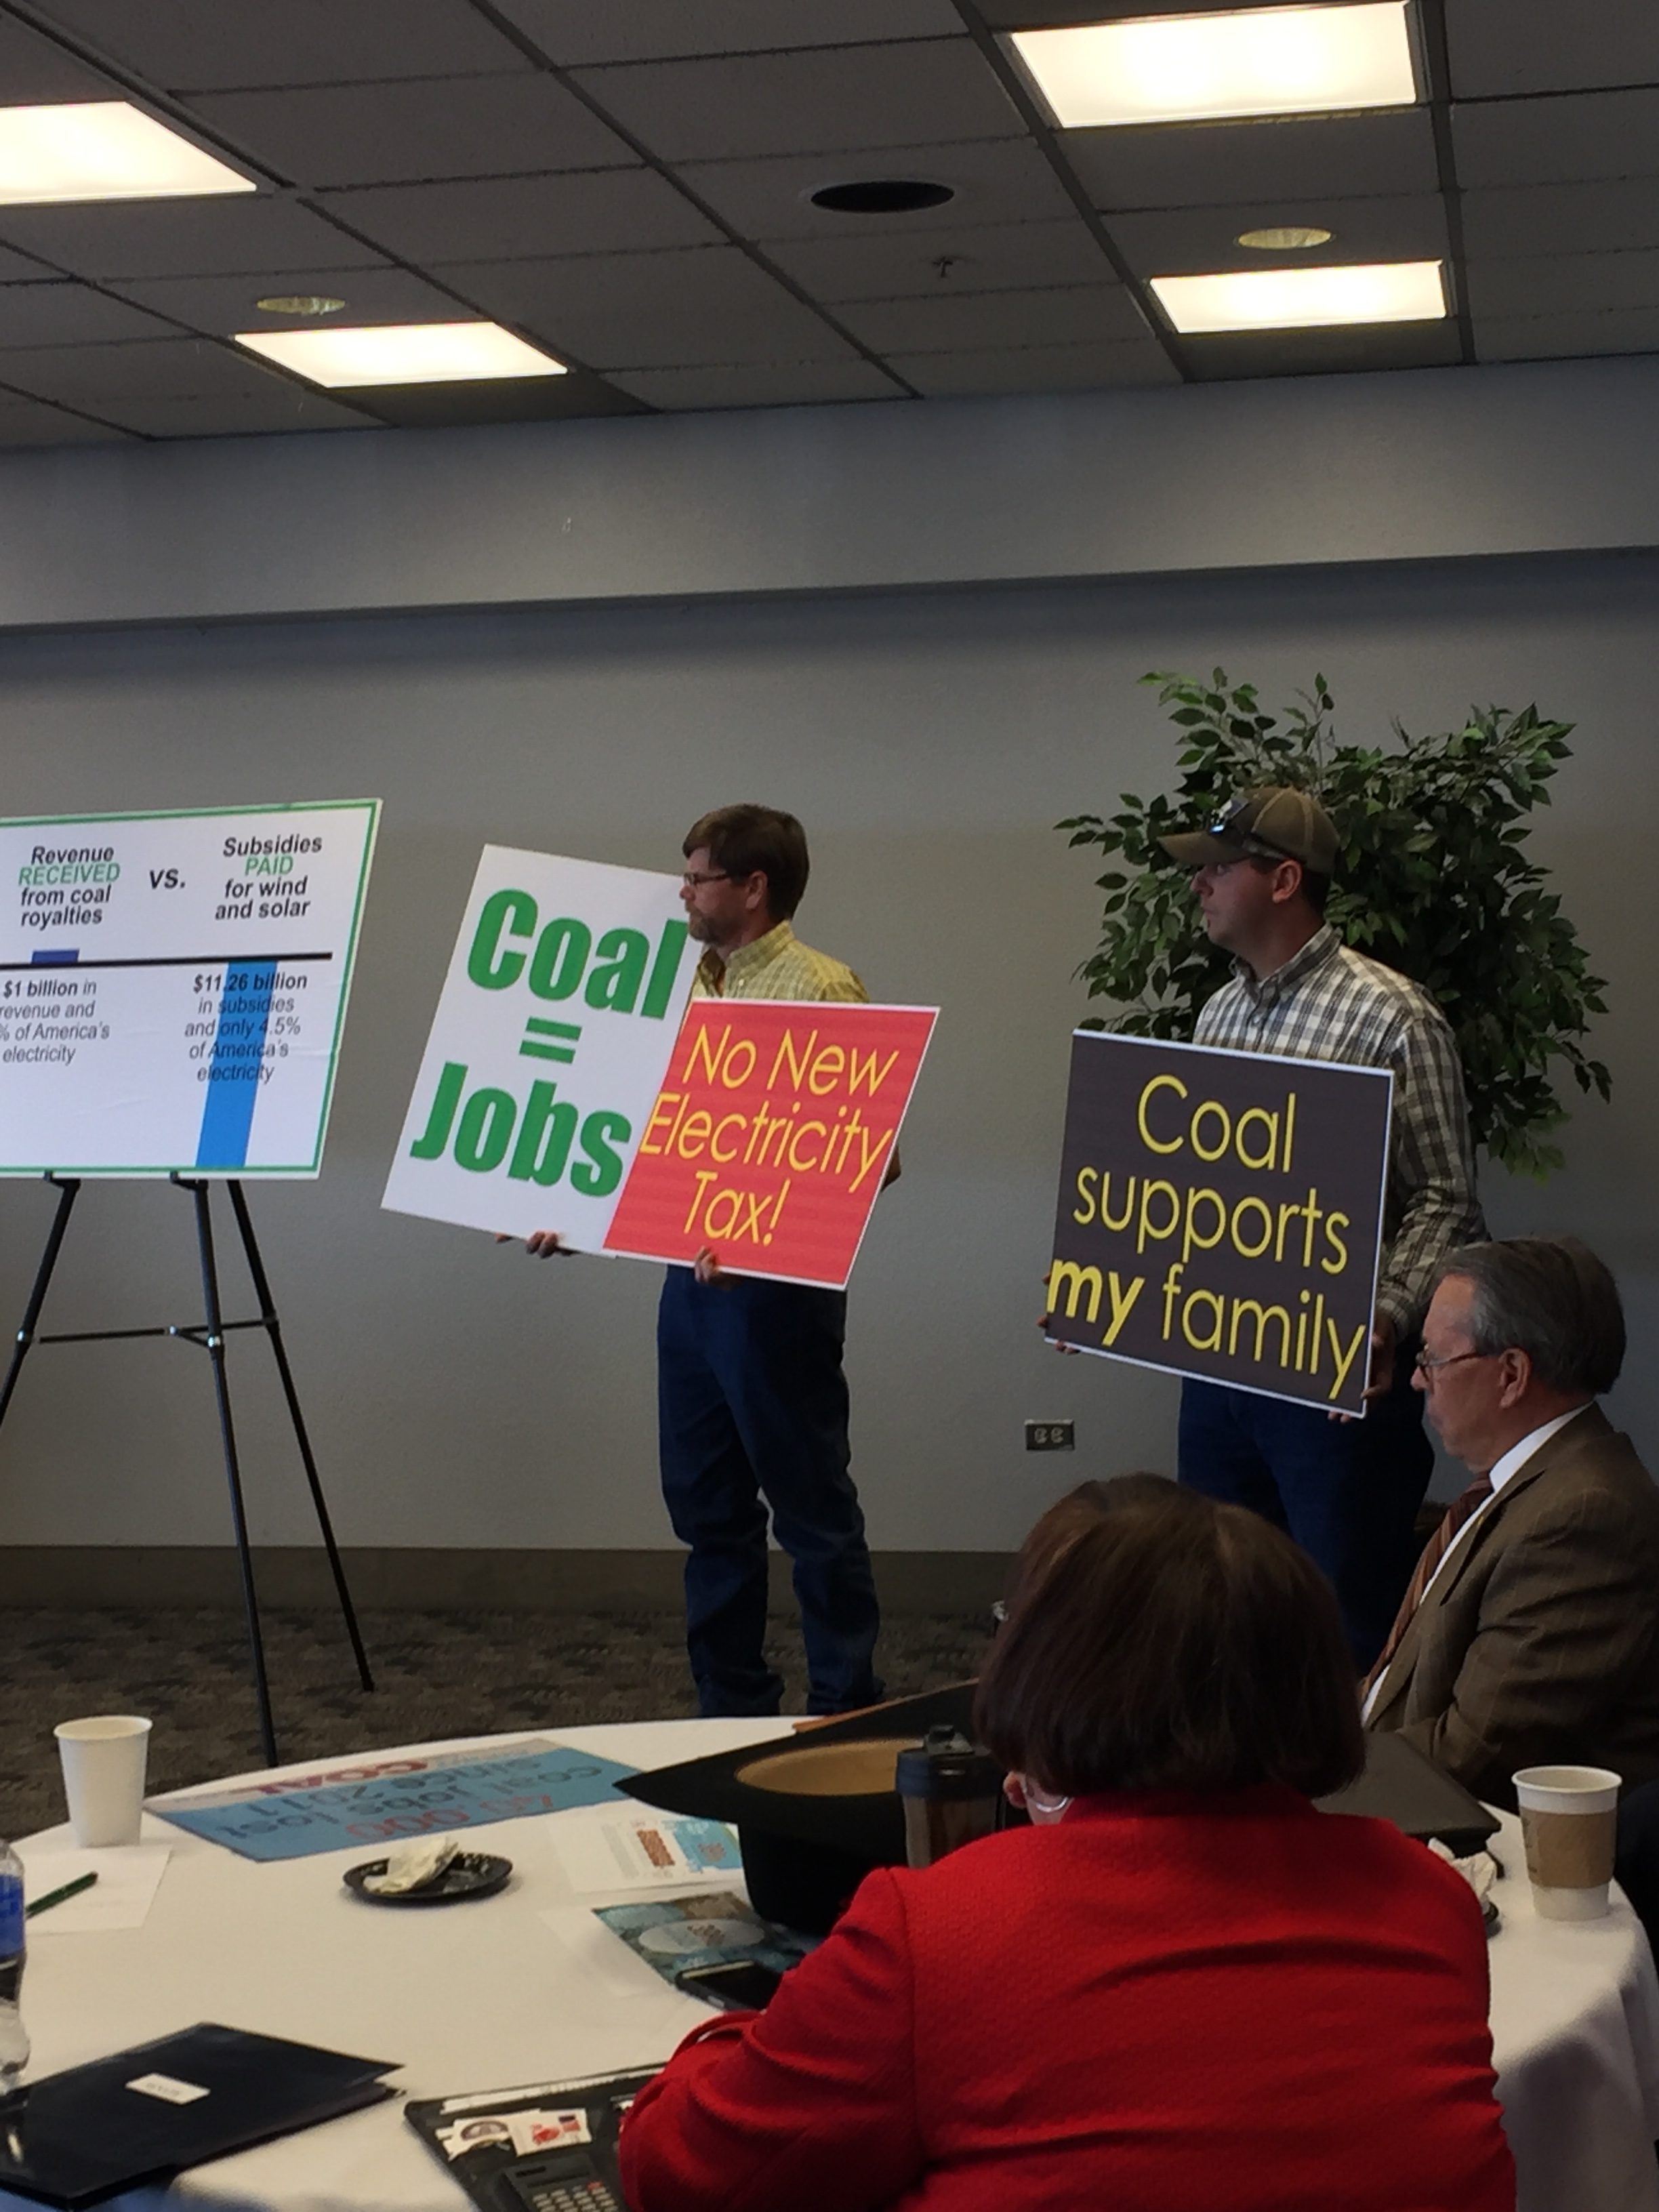 Coal supporters at the coal rally in Casper on Tuesday.